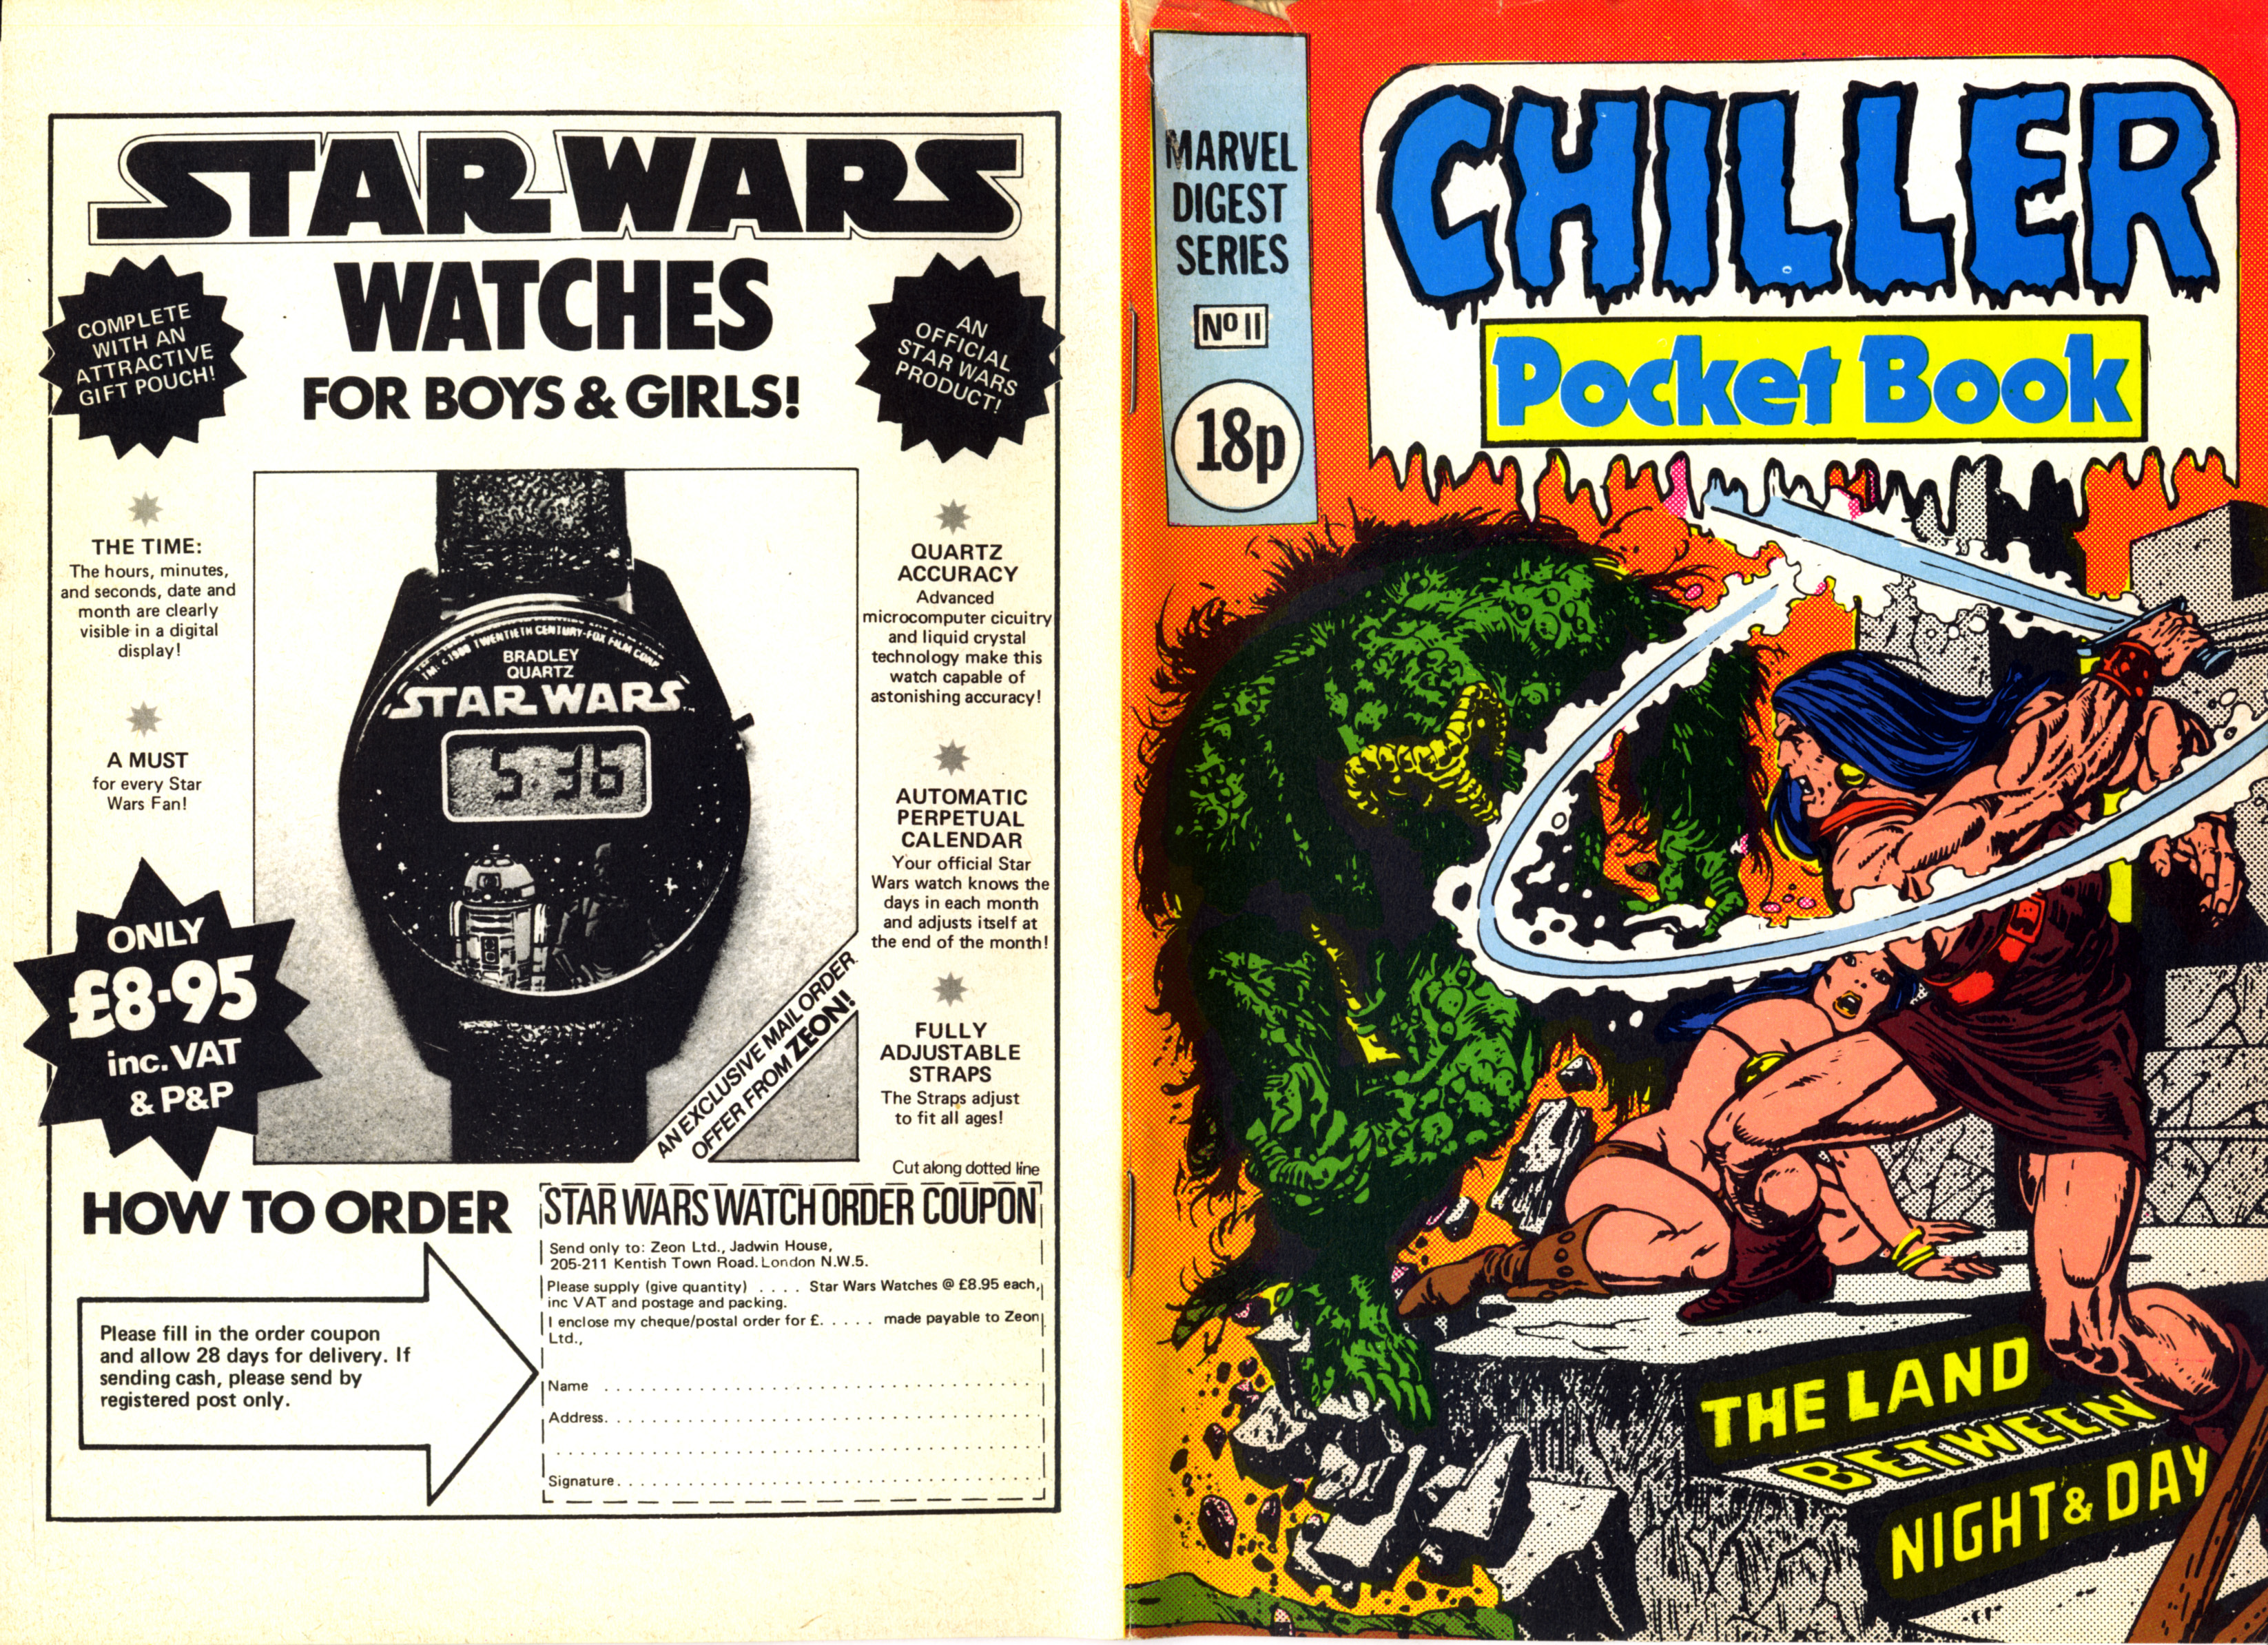 Read online Chiller Pocket Book comic -  Issue #11 - 3